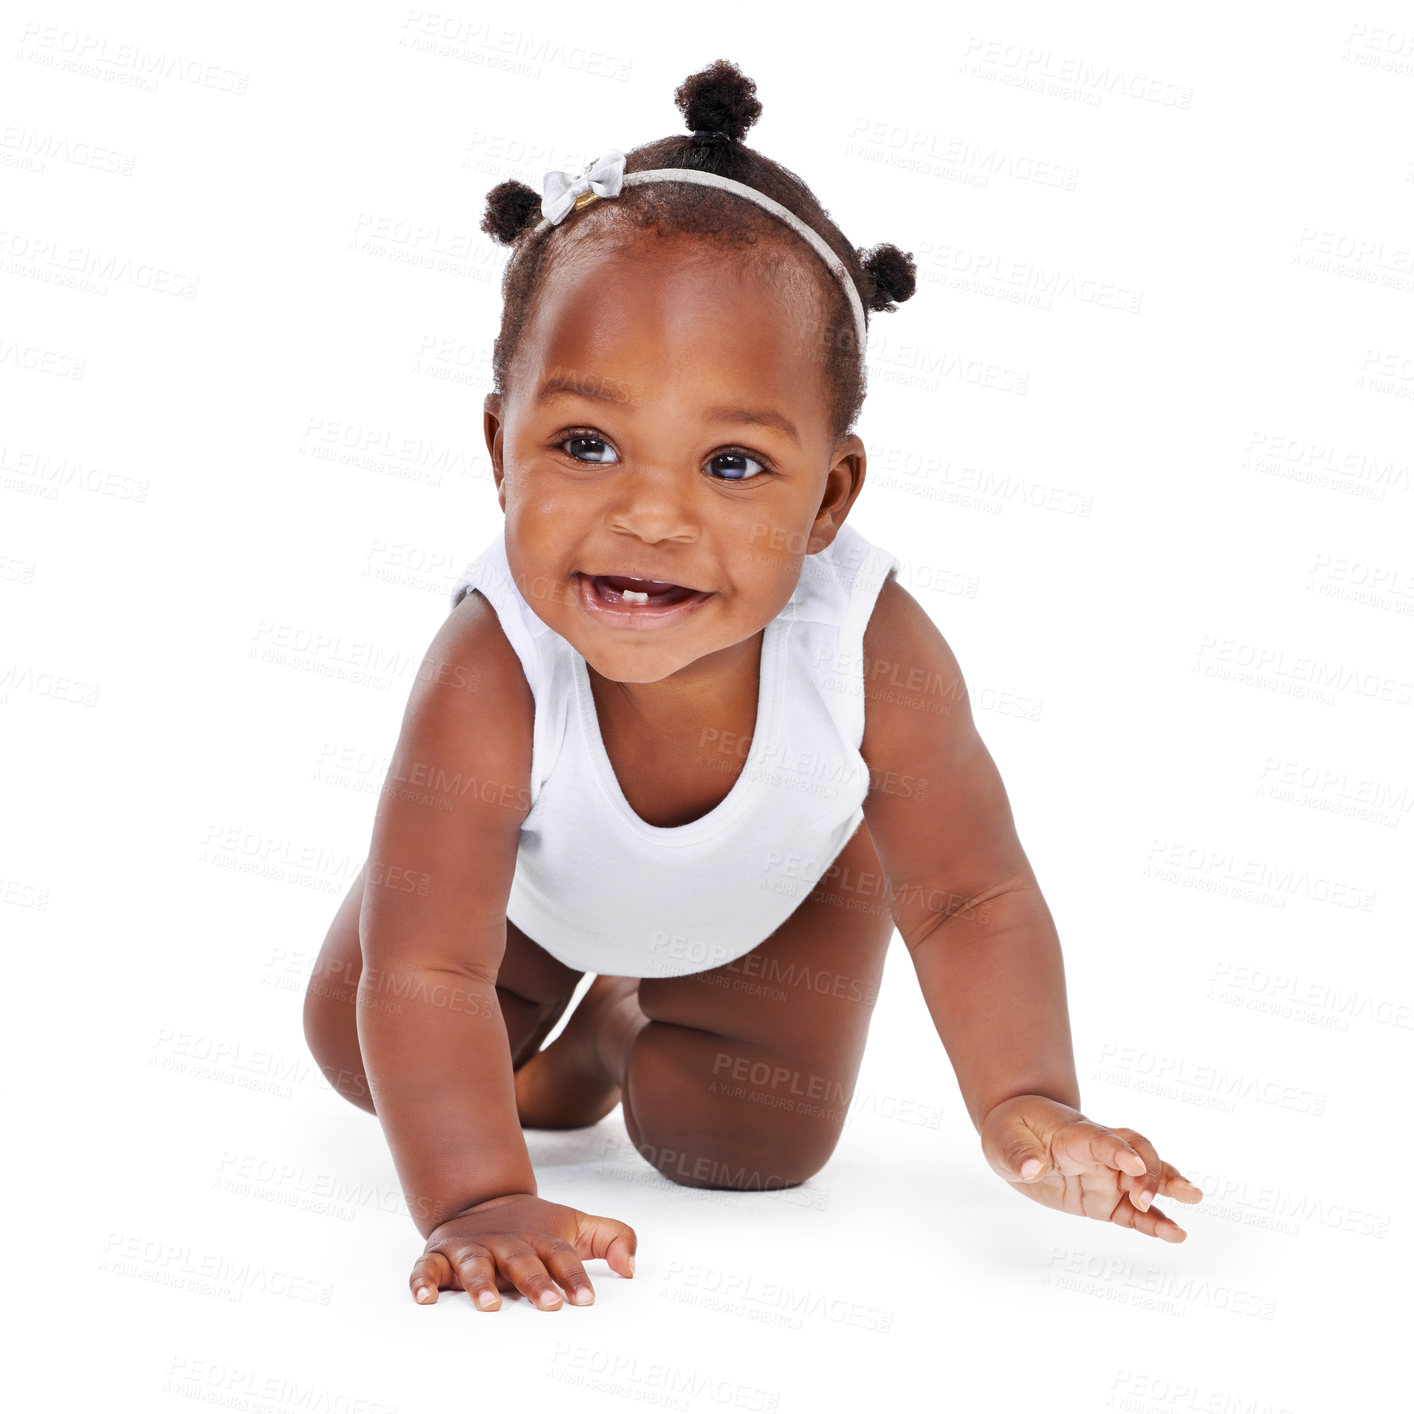 Buy stock photo Smile, crawl and African girl baby isolated on white background with playful happiness and growth. Learning, playing and development, happy face of black child crawling on floor on studio backdrop.